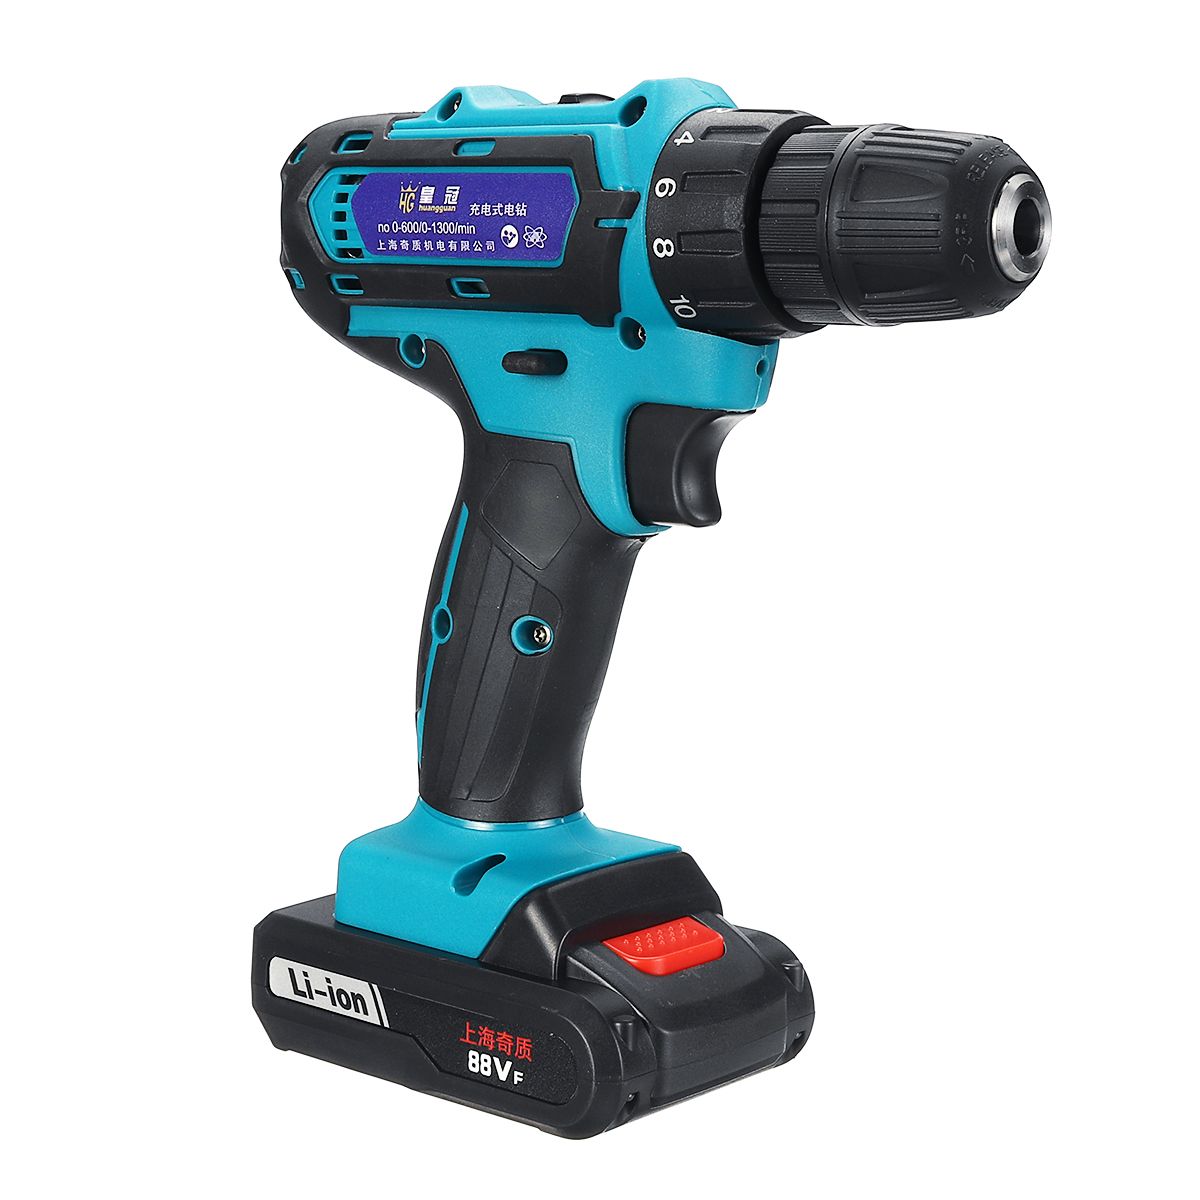 Drillpro-88VF-Cordless-Electric-Drill-Rechargeable-Screwdriver-181-Torque-W-2-Li-ion-Battery-1568759